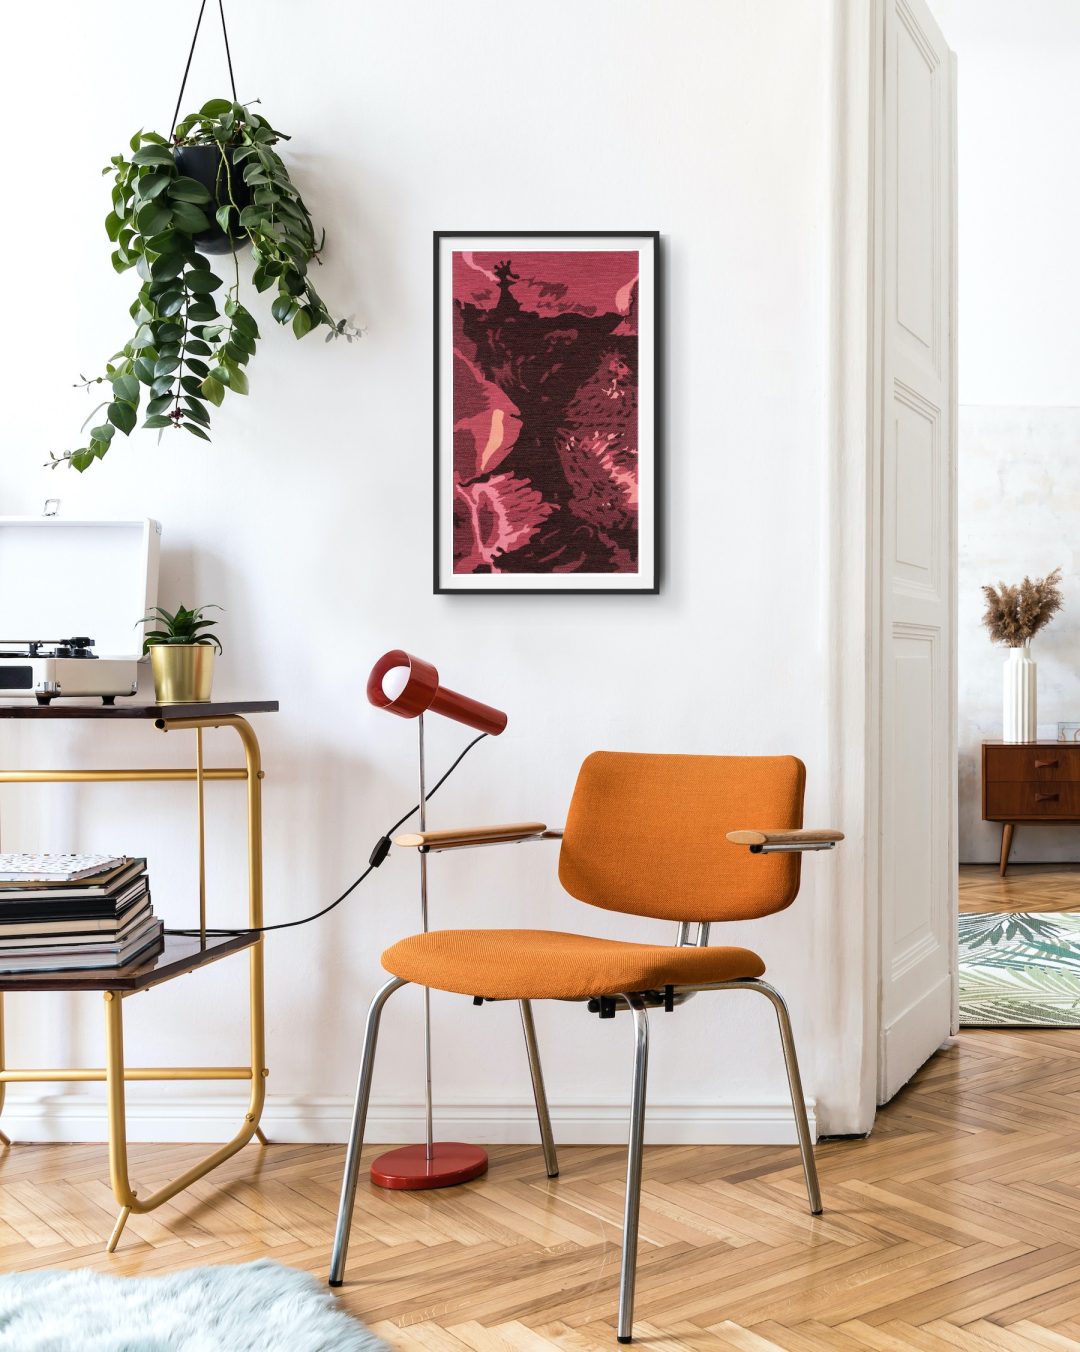 The picture shows a framed fine art giclee print from the artwork Käsittäjä 1, hung on the wall.